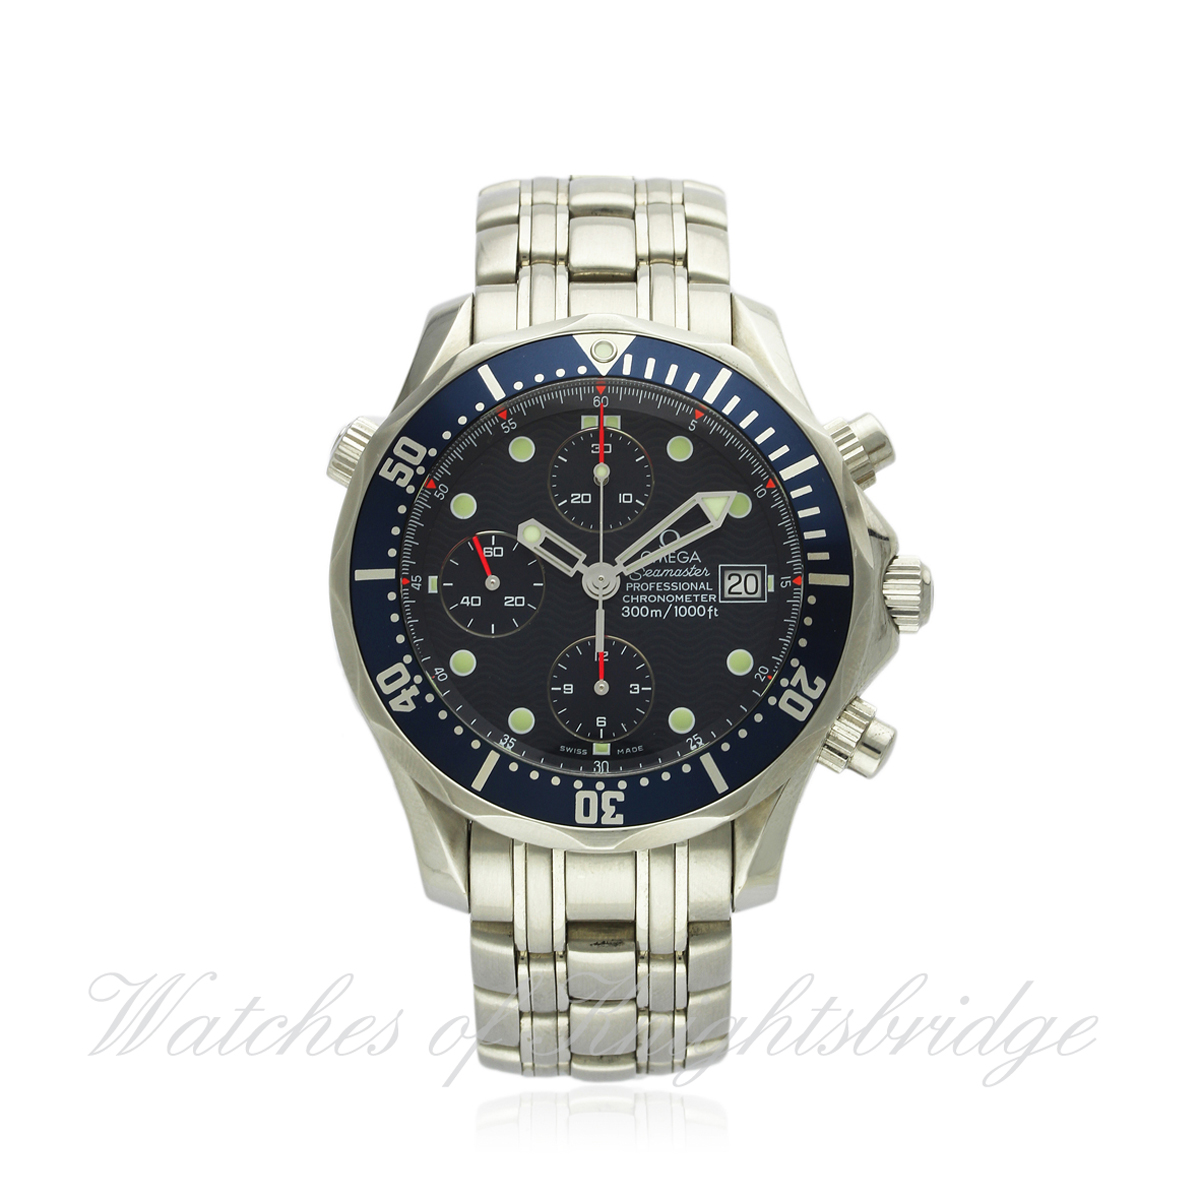 A GENTLEMAN`S STAINLESS STEEL OMEGA SEAMASTER PROFESSIONAL 300M CHRONOGRAPH BRACELET WATCH DATED